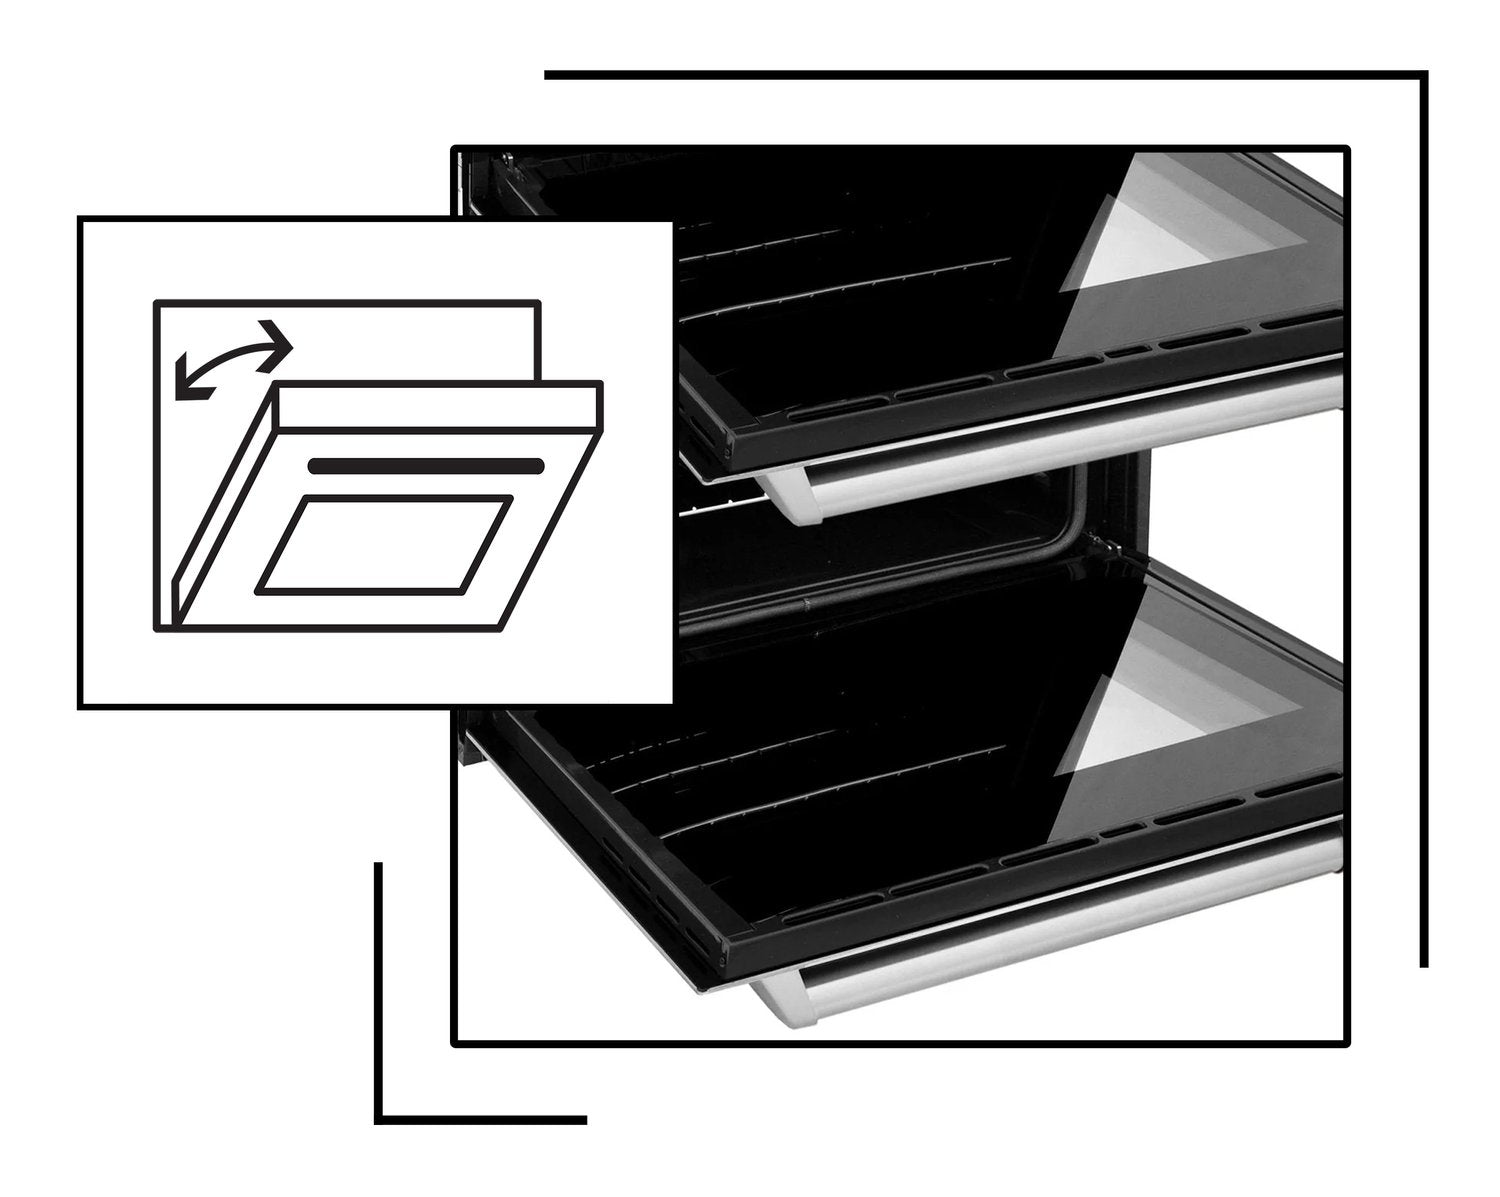 Icon and image representing wall oven with stay-put hinges